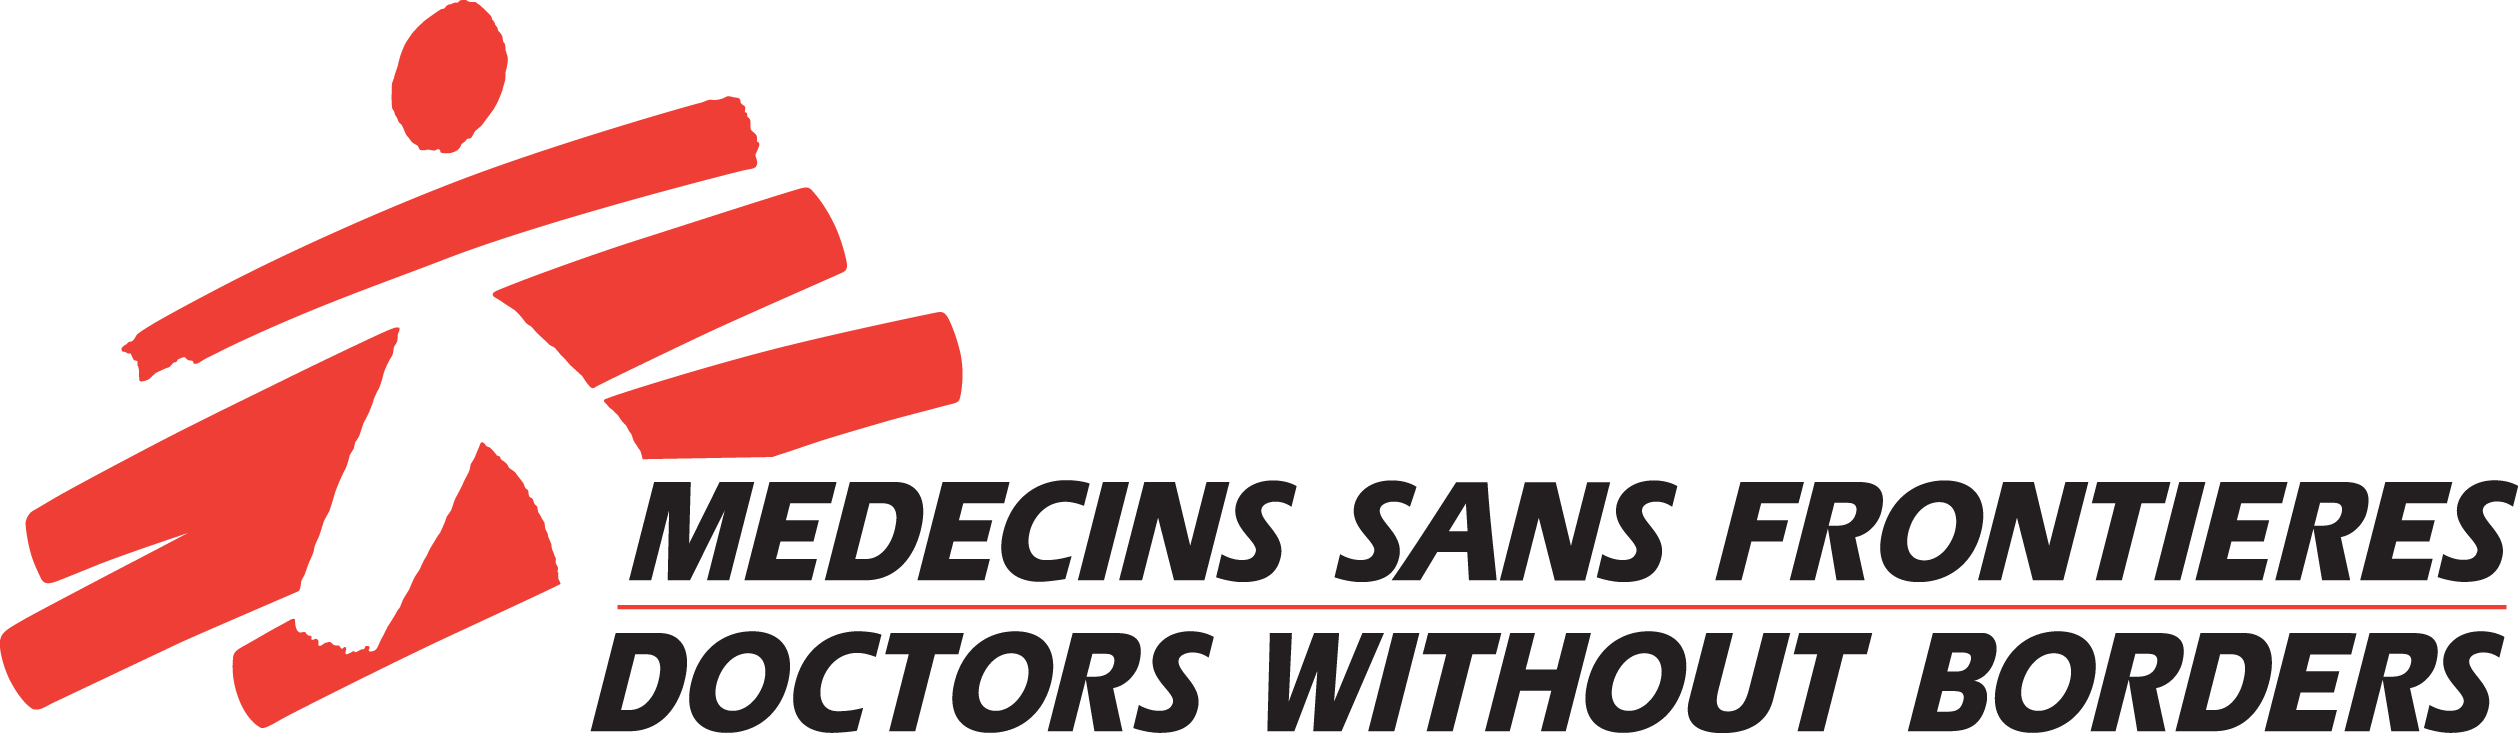 Medecins Sans Frontieres / Doctors Without Borders (MSF)